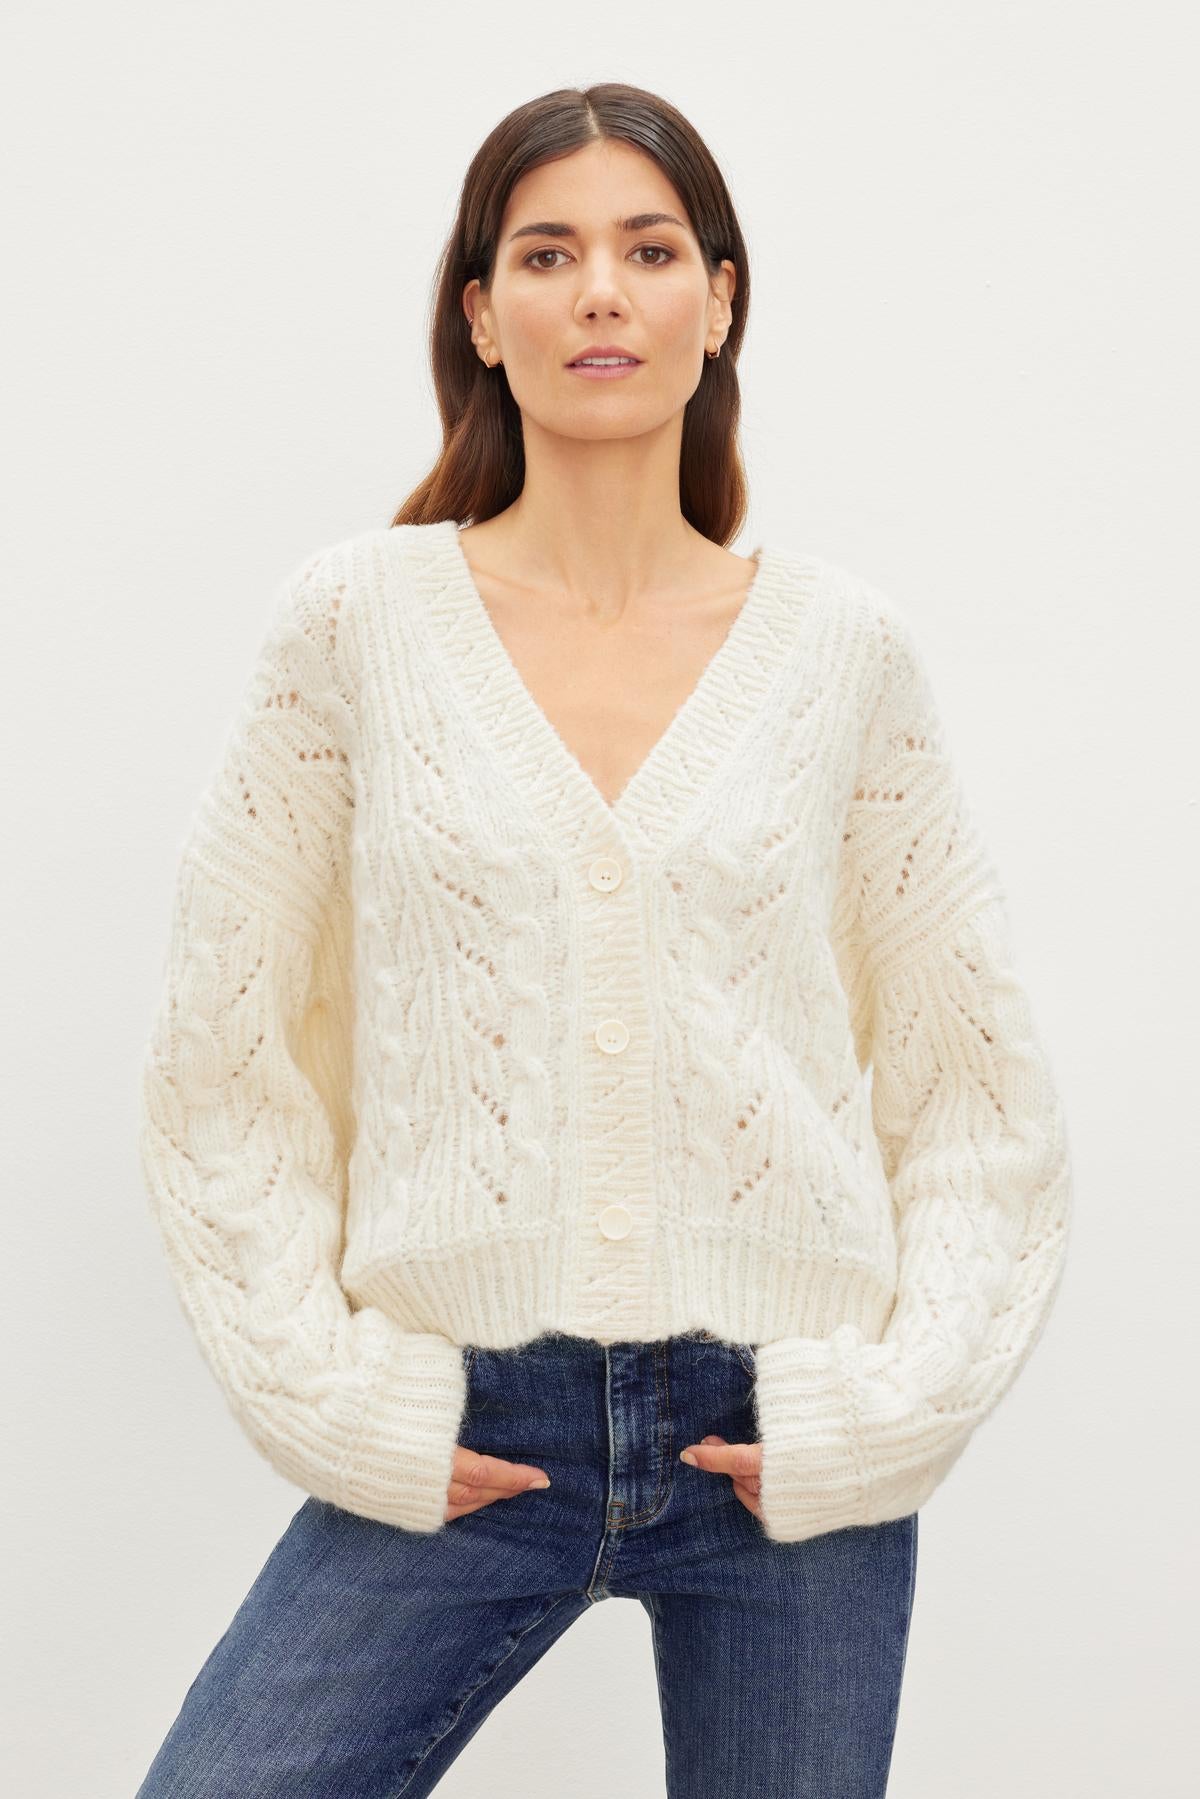   The model is wearing the Velvet by Graham & Spencer ELISA ALPACA BLEND CARDIGAN, a versatile white cable knit sweater with a relaxed fit, paired with jeans. 